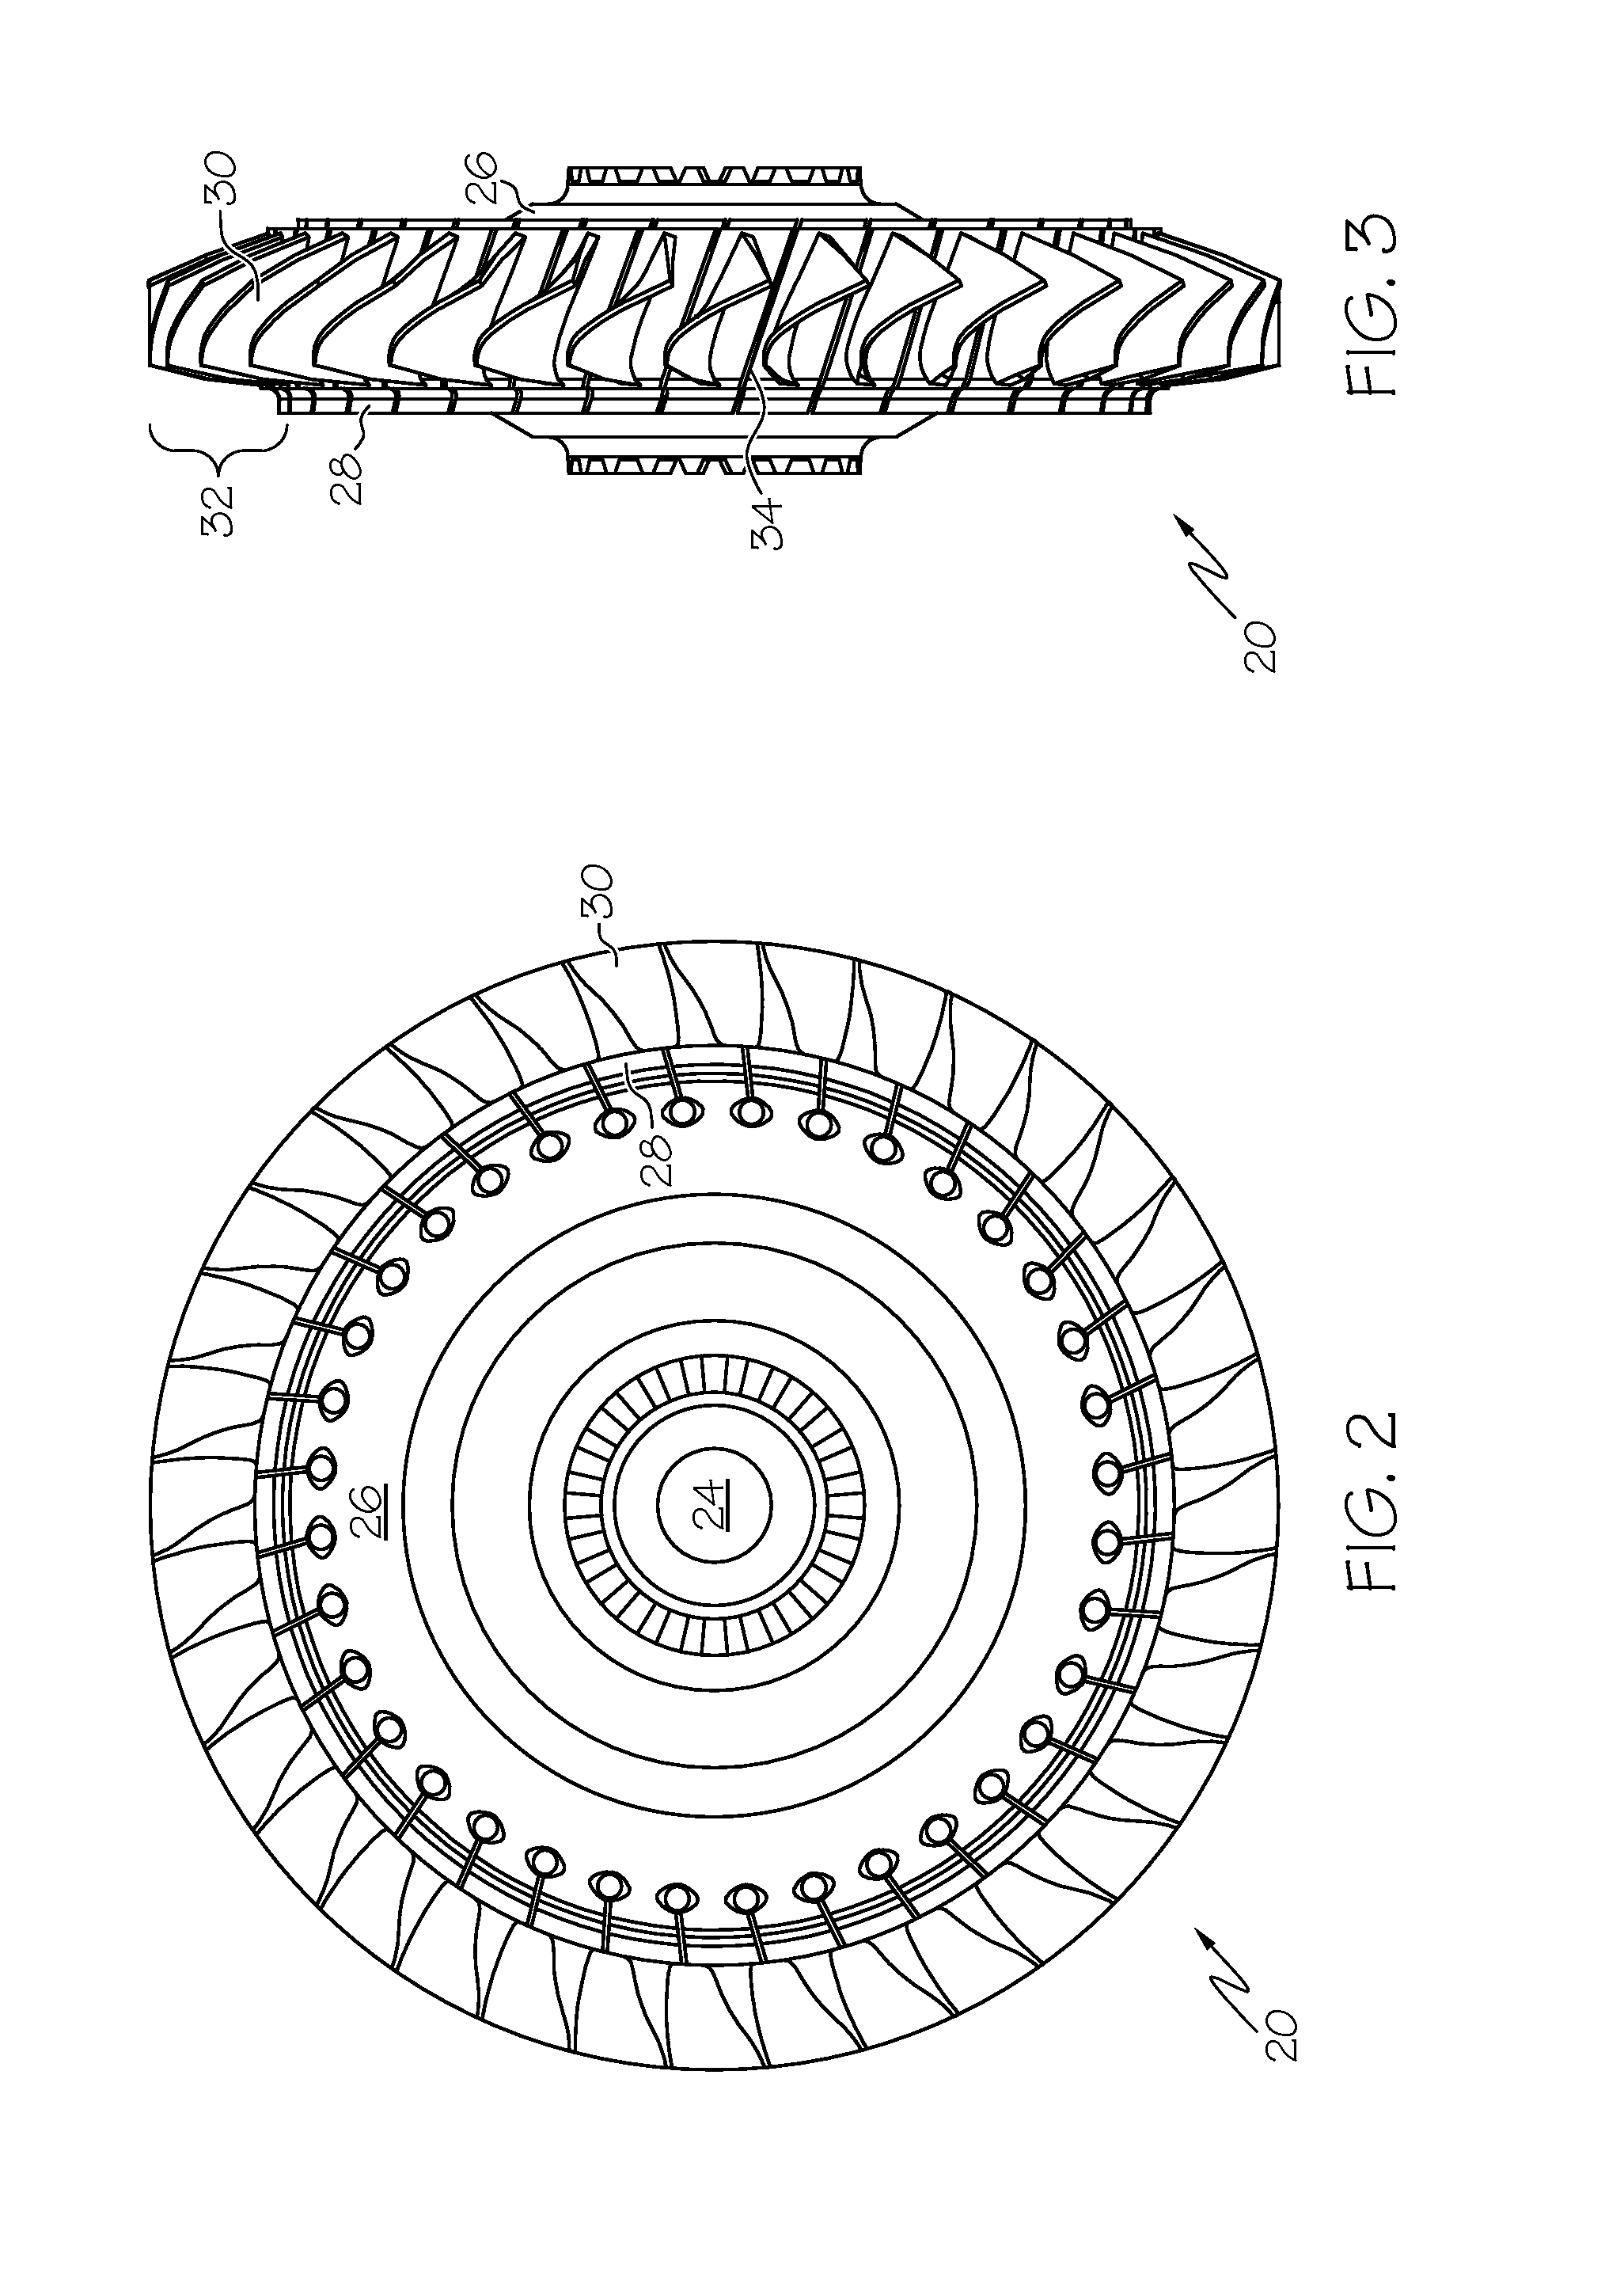 First stage dual-alloy turbine wheel